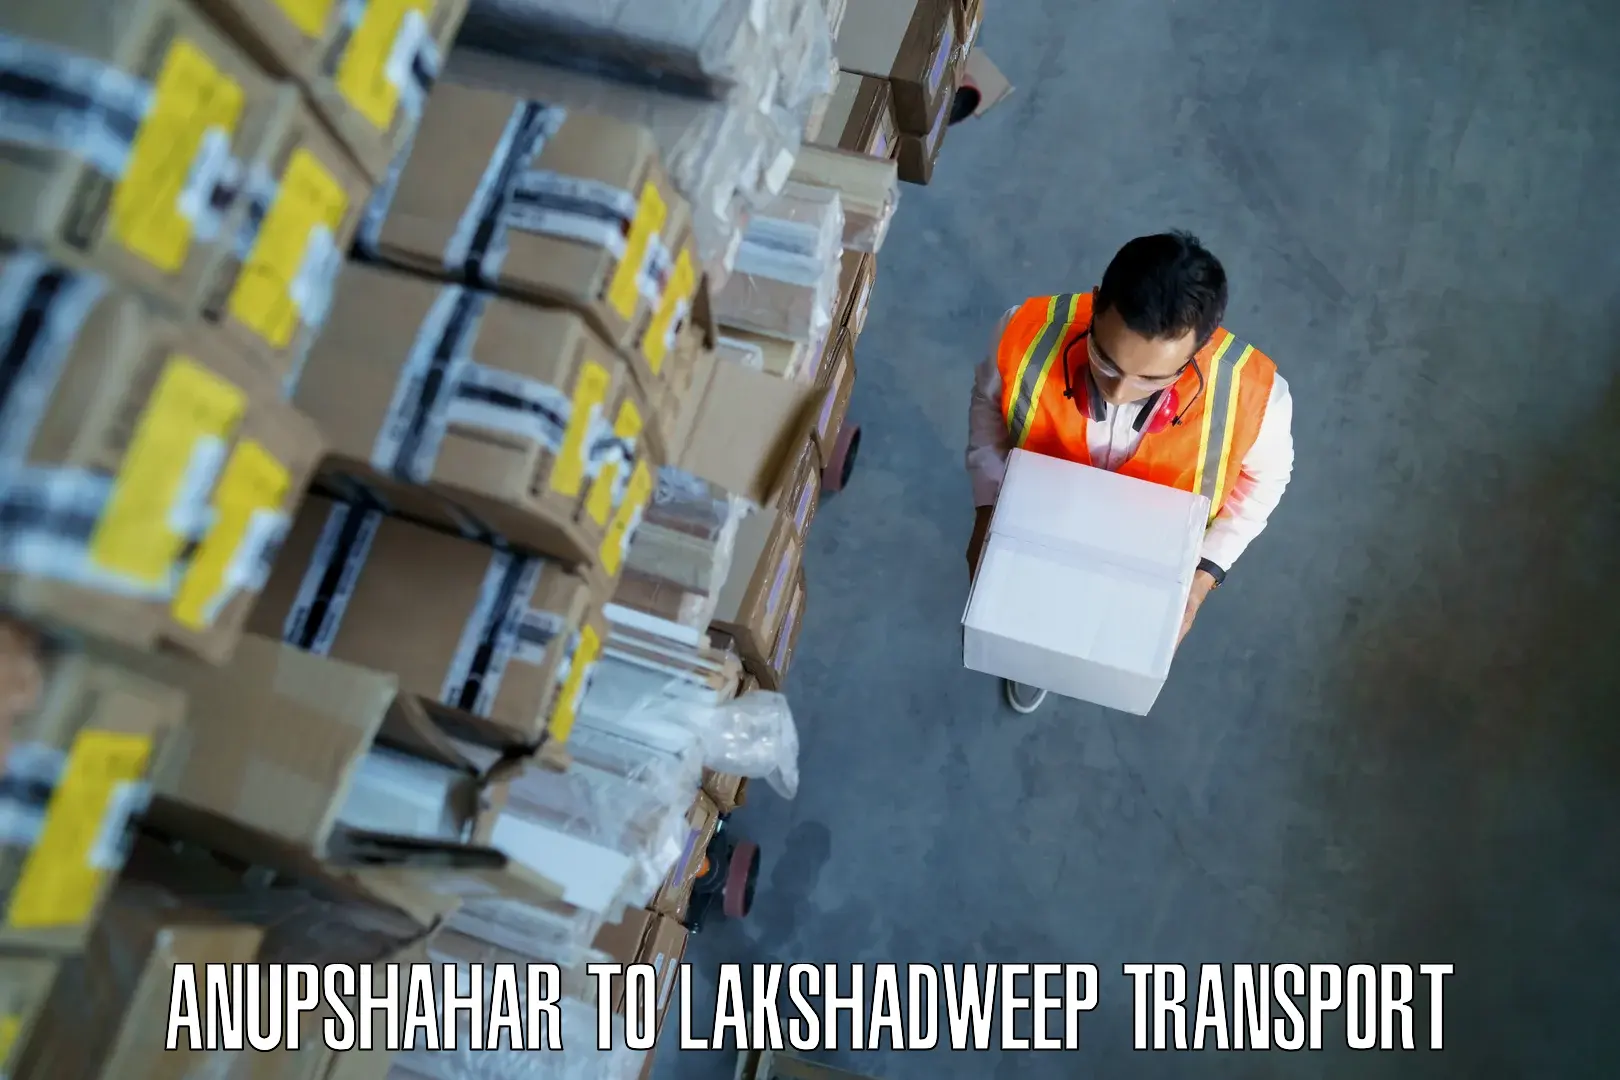 Daily parcel service transport Anupshahar to Lakshadweep